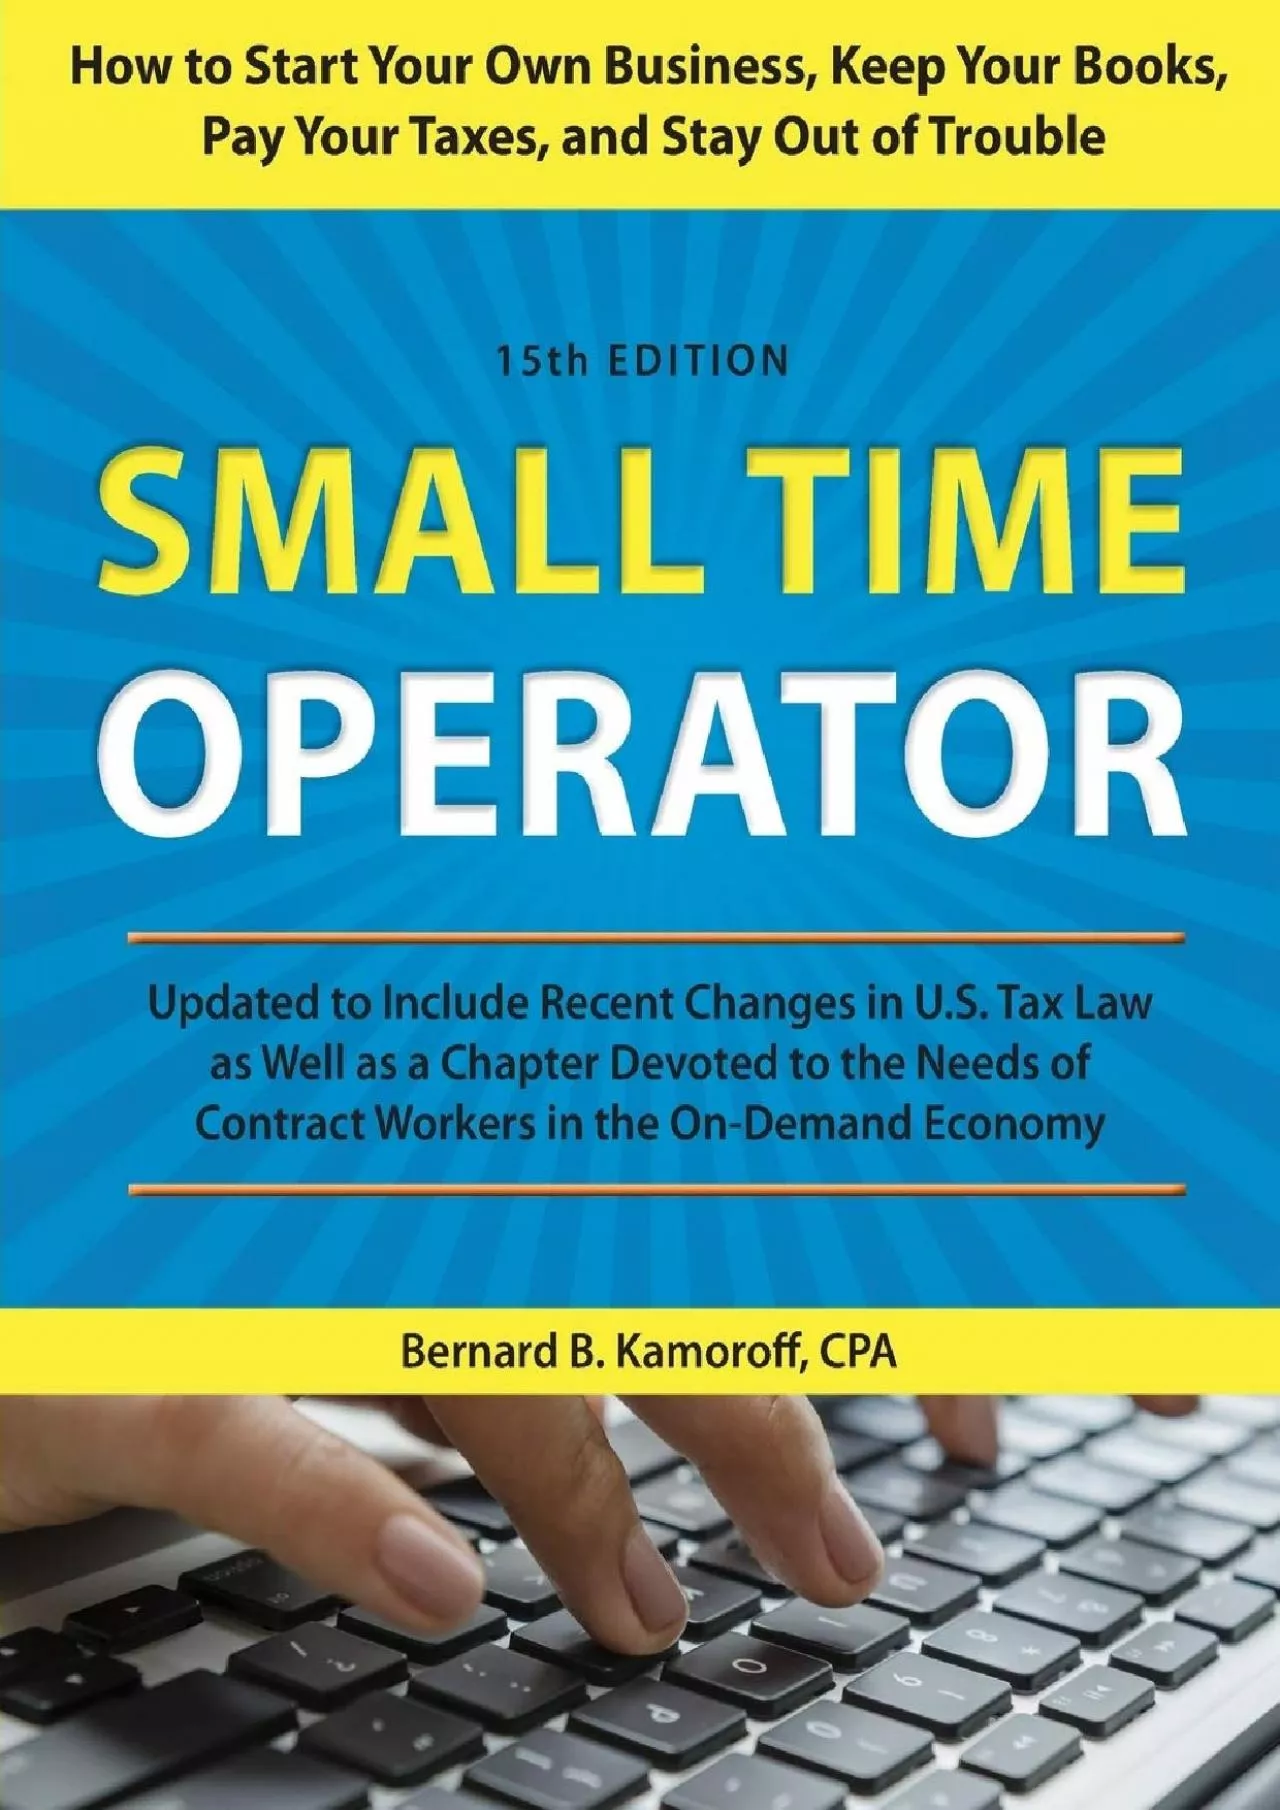 (EBOOK)-Small Time Operator: How to Start Your Own Business, Keep Your Books, Pay Your